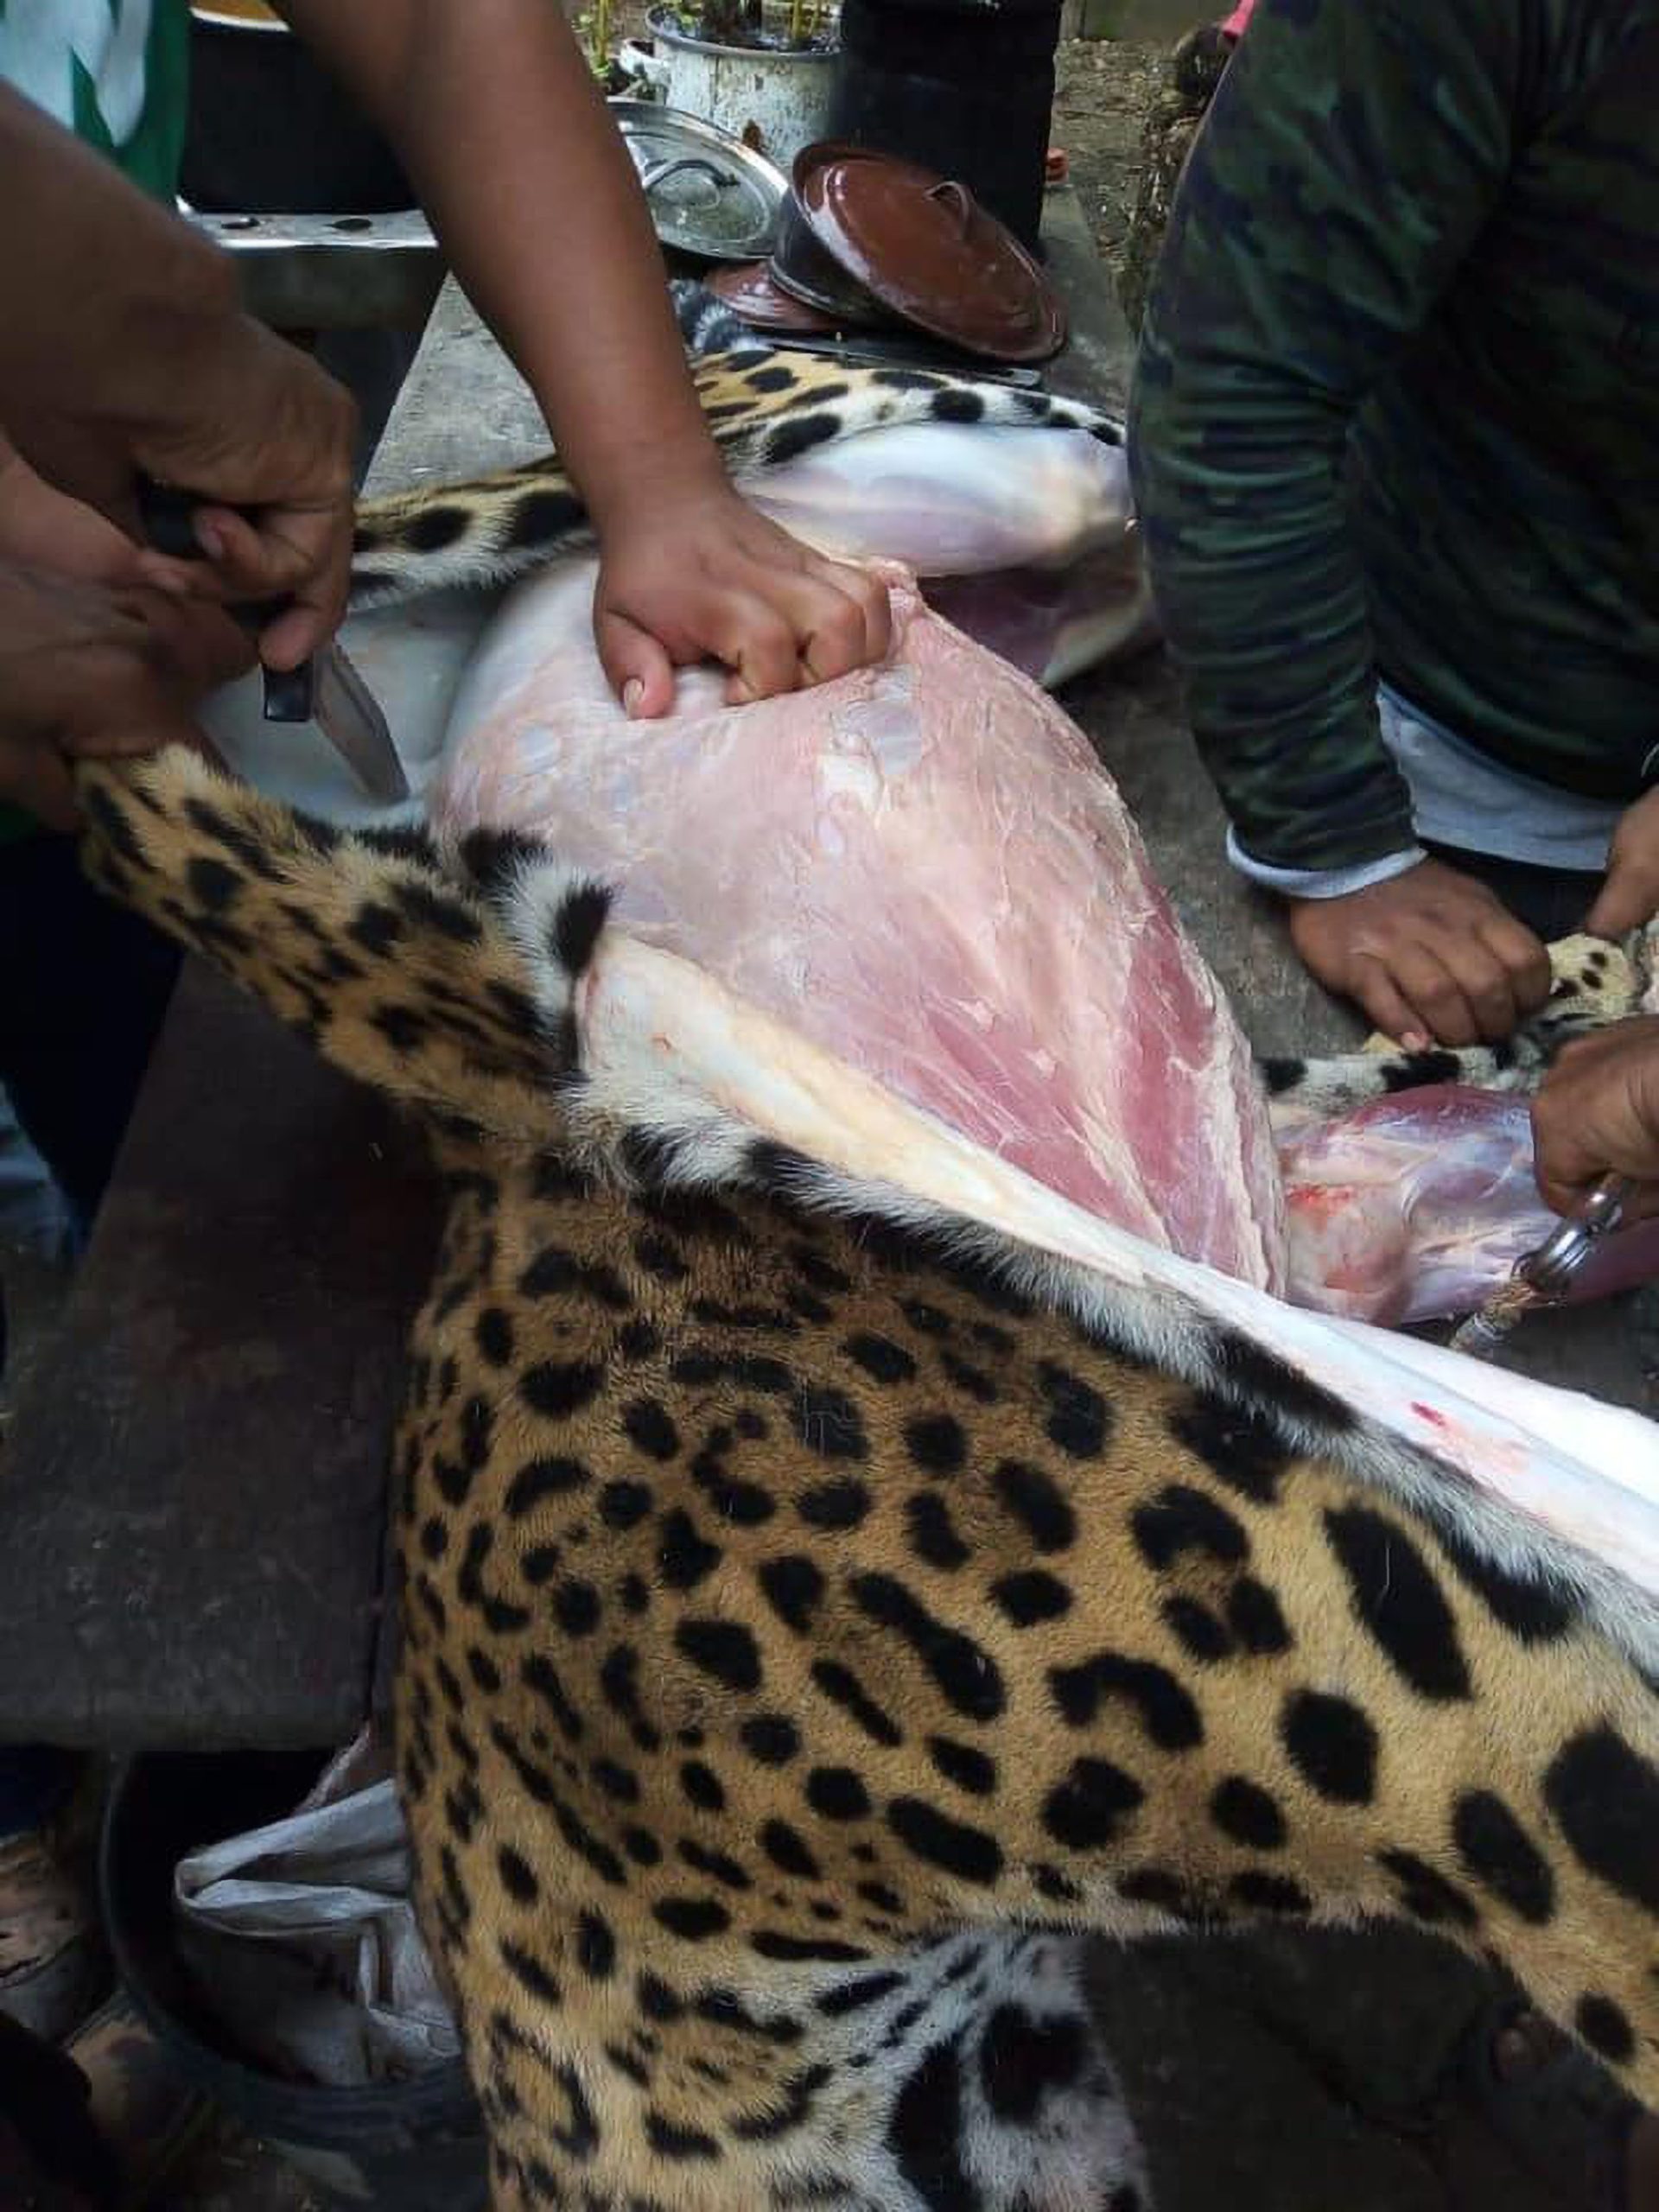 Read more about the article Outrage Over Snaps Showing Endangered Jaguar Being Skinned After It Was Hunted